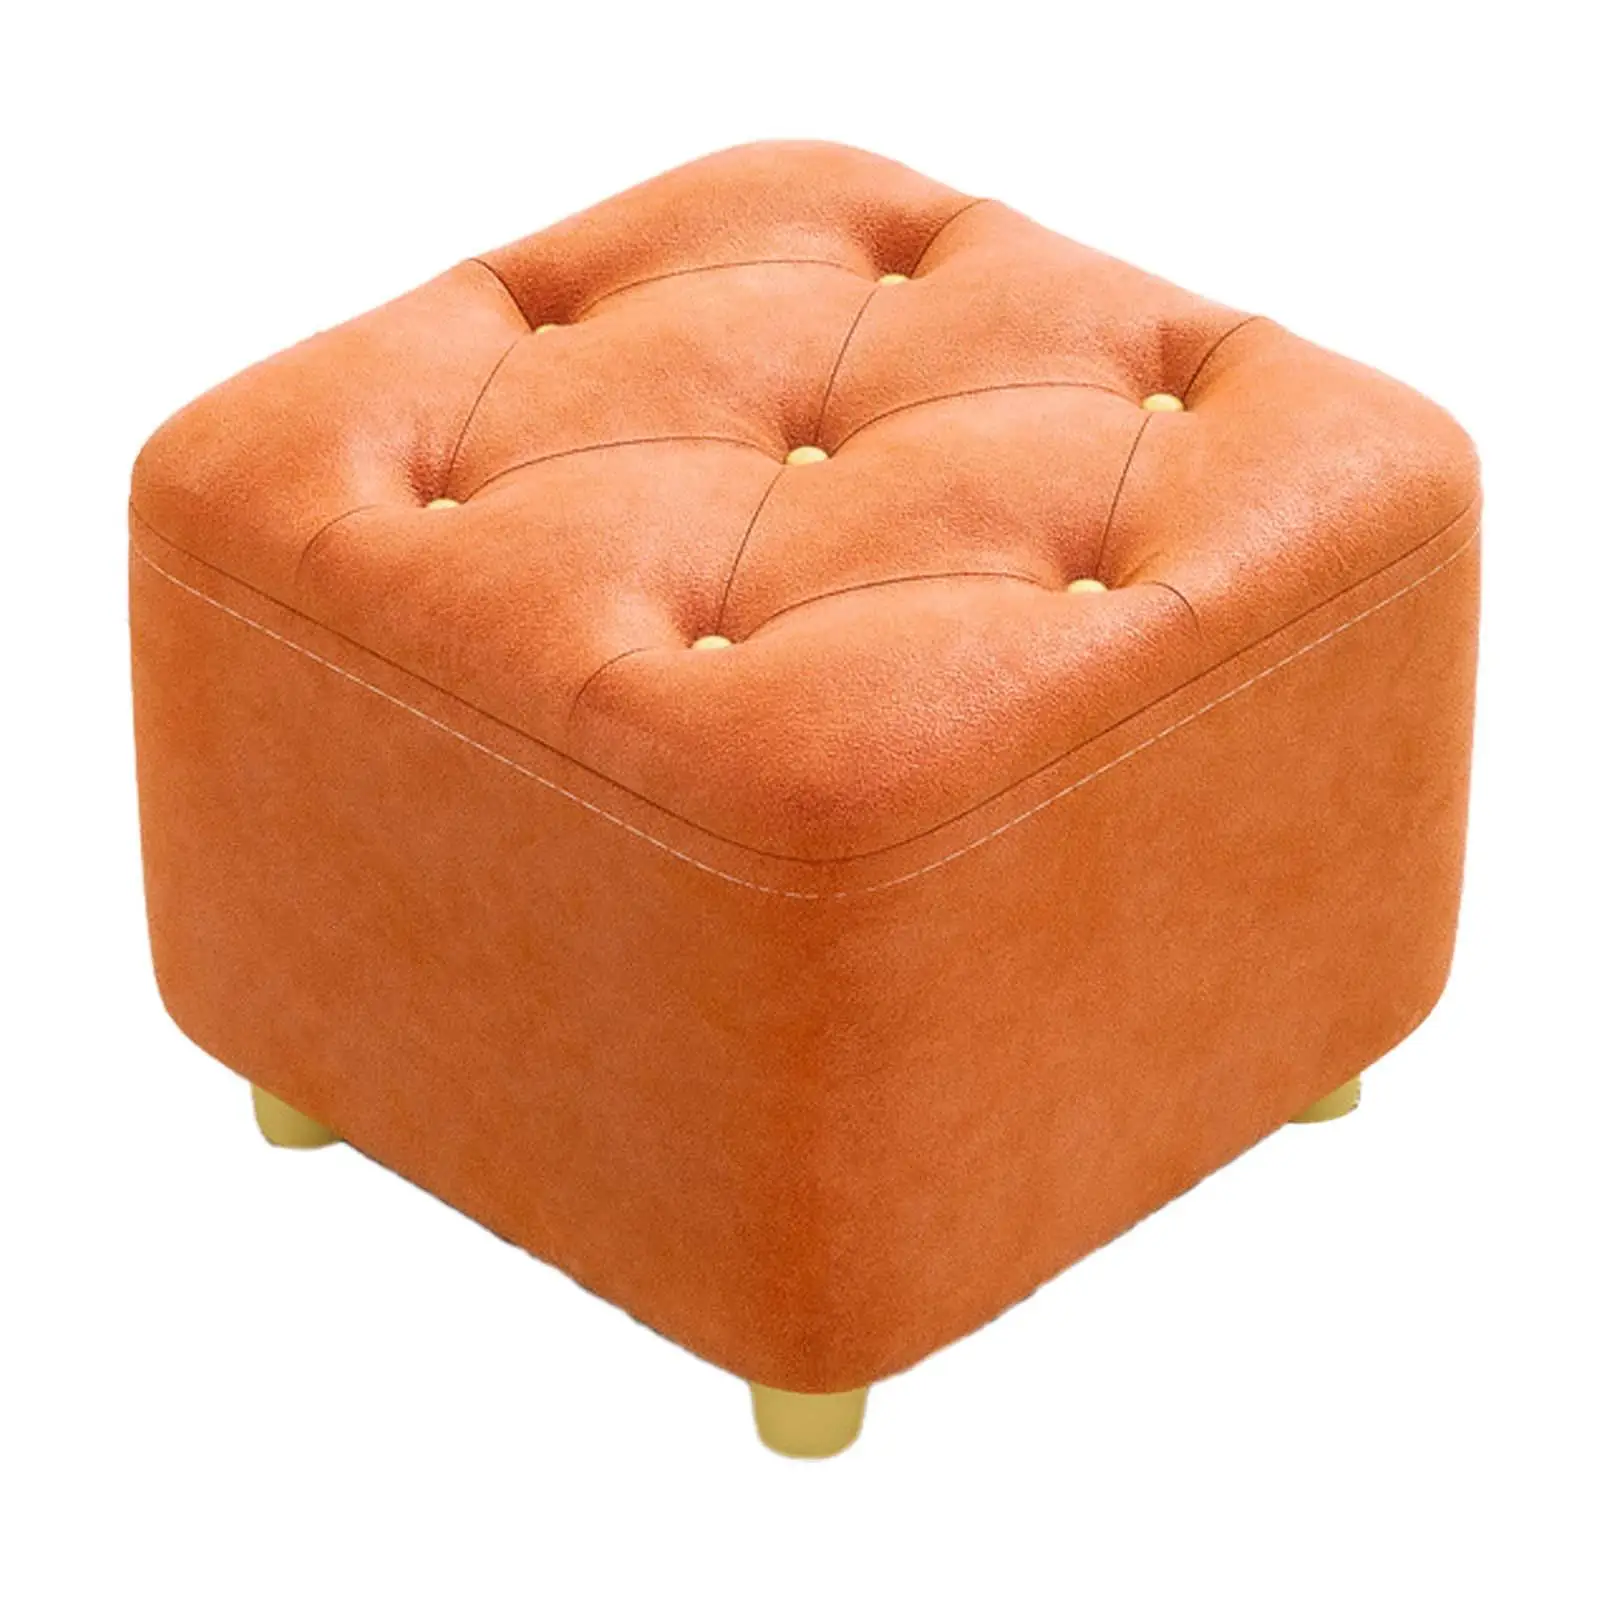 Square Footstool Stylish Anti Slip Padded Seat Step Stool Furniture Foot Stool for Couch Nursery Dressing Room Office Apartment